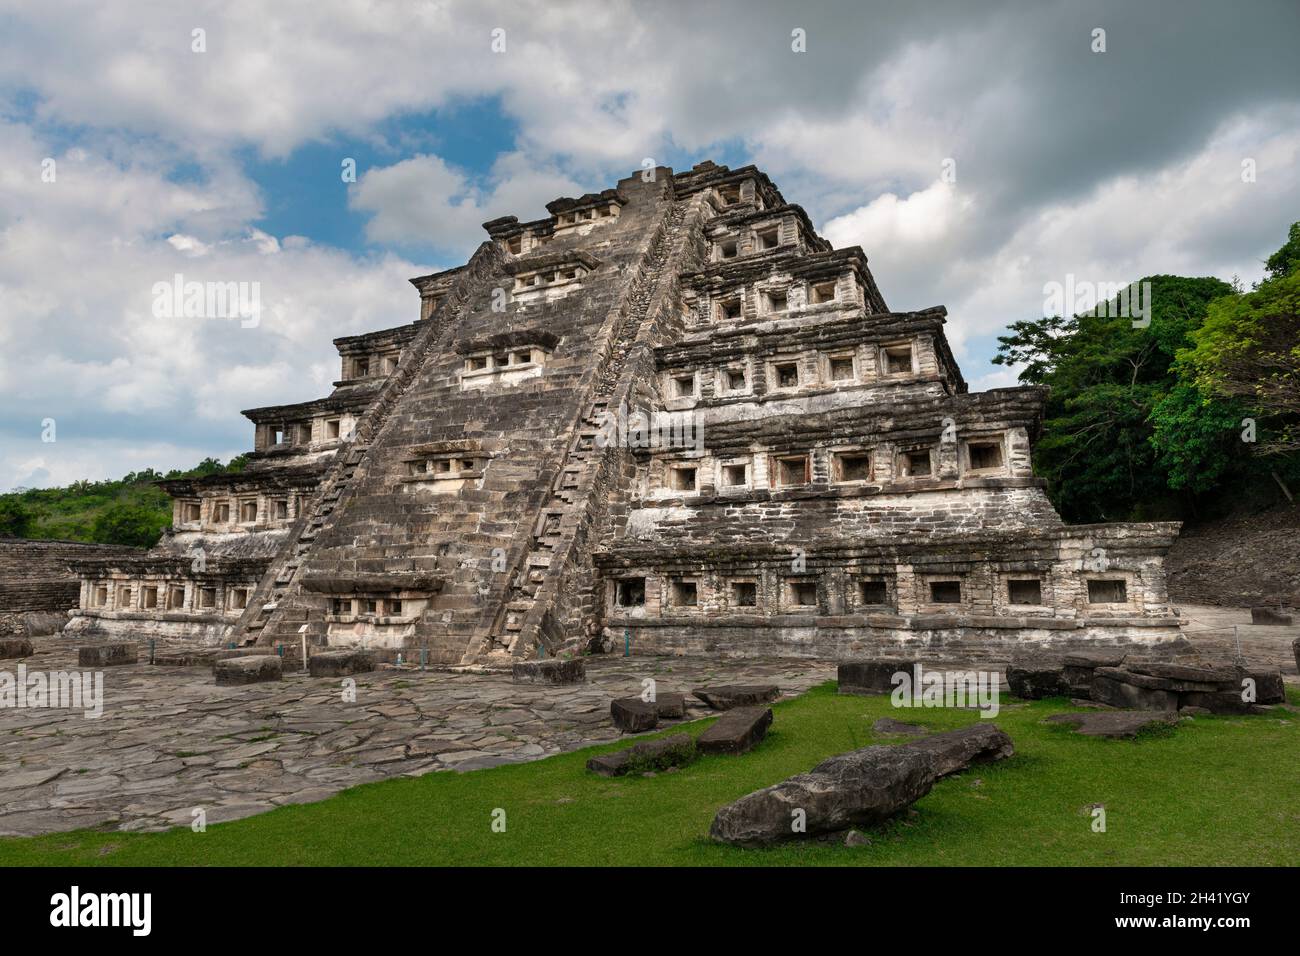 The Pyramid of the Niches at the EL Tajin archeological site, in Papantla, Veracruz, Mexico. Stock Photo